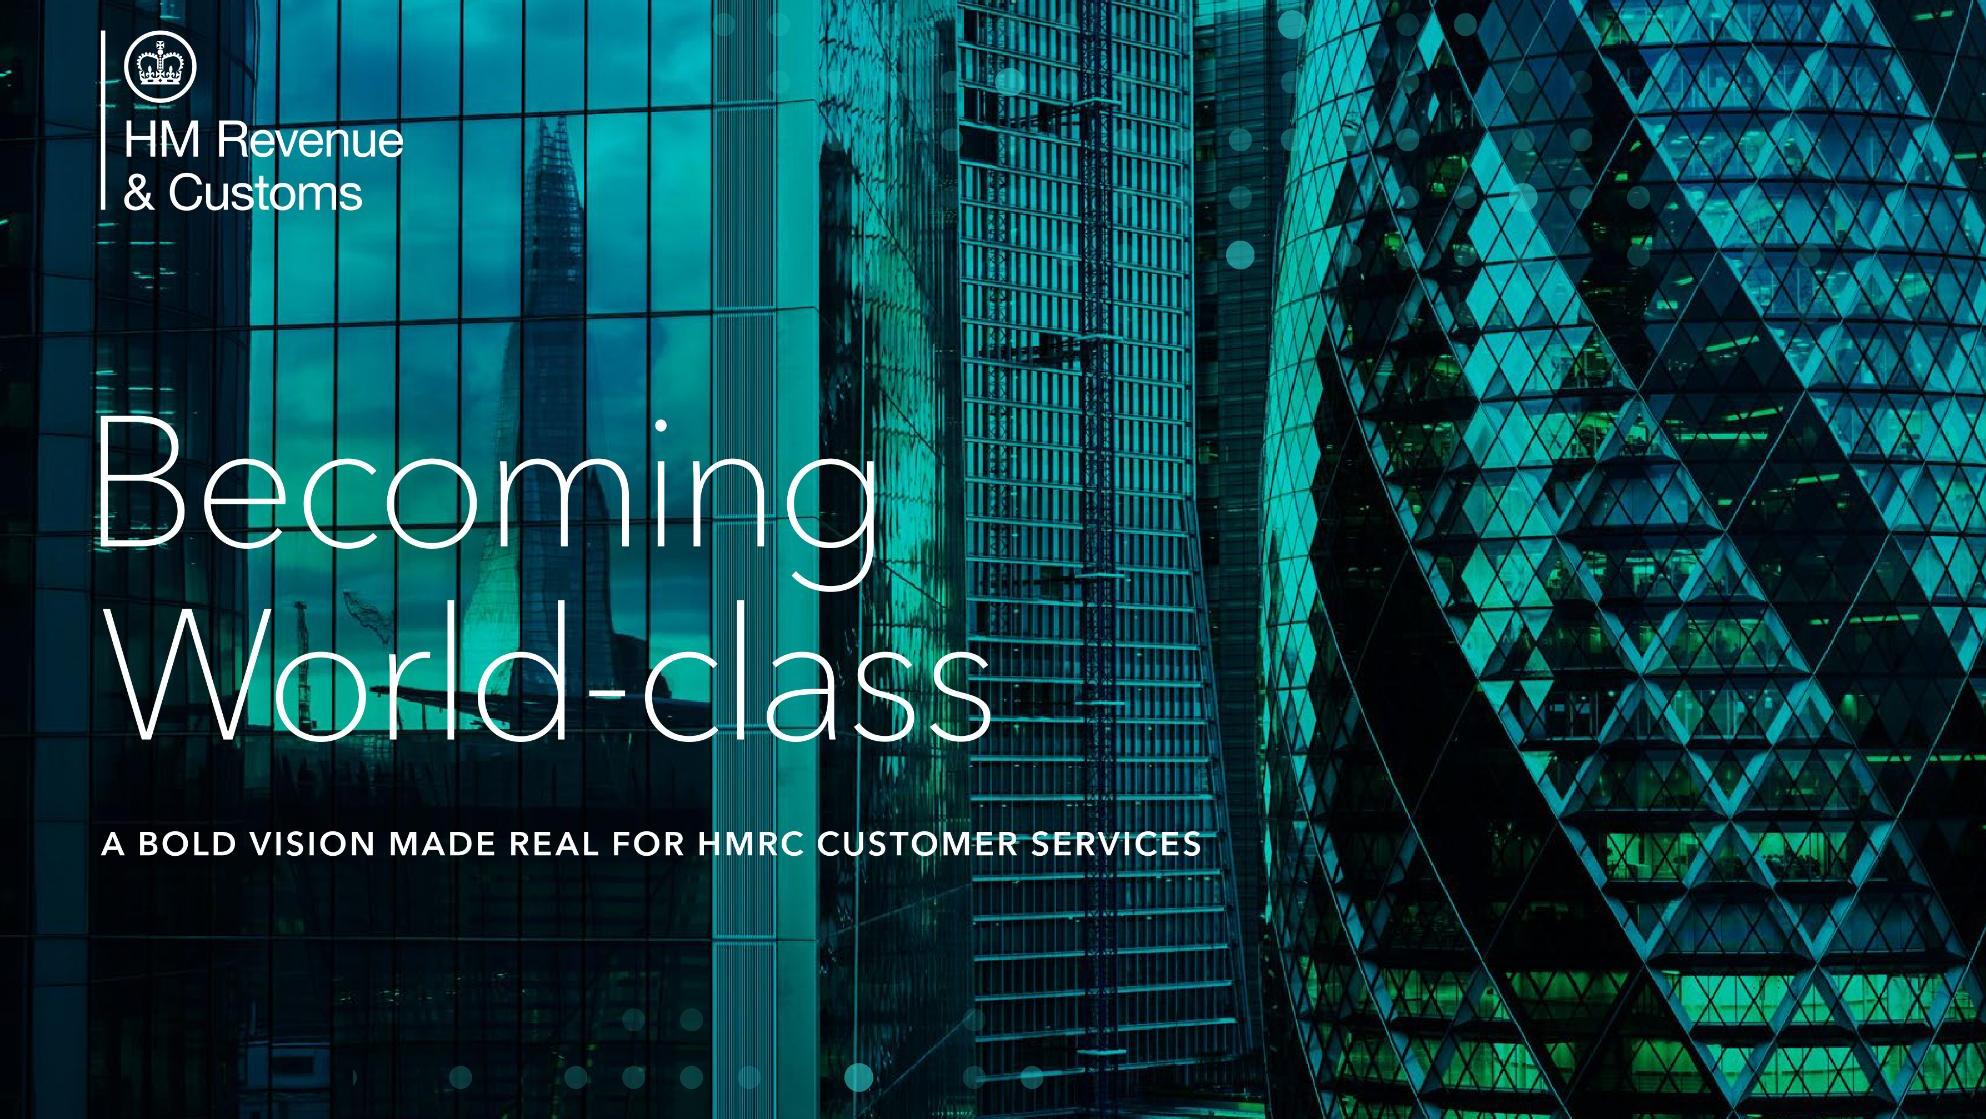 Becoming World-class, HM Revenue and Customs